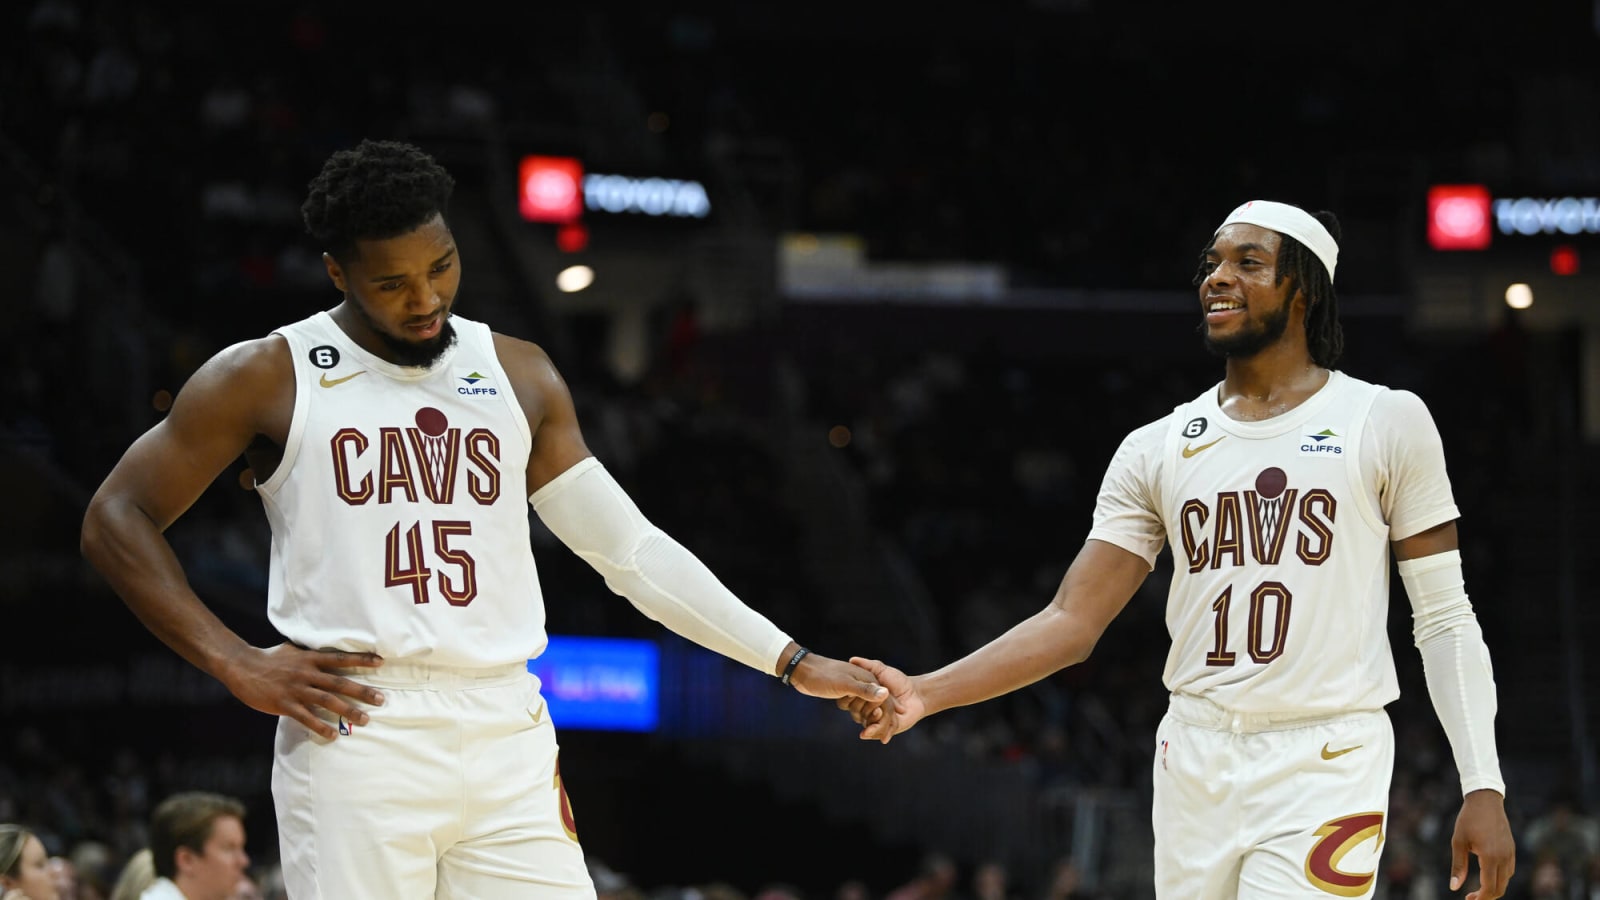  Cavs Work Out Some Kinks as Real Thing Looms